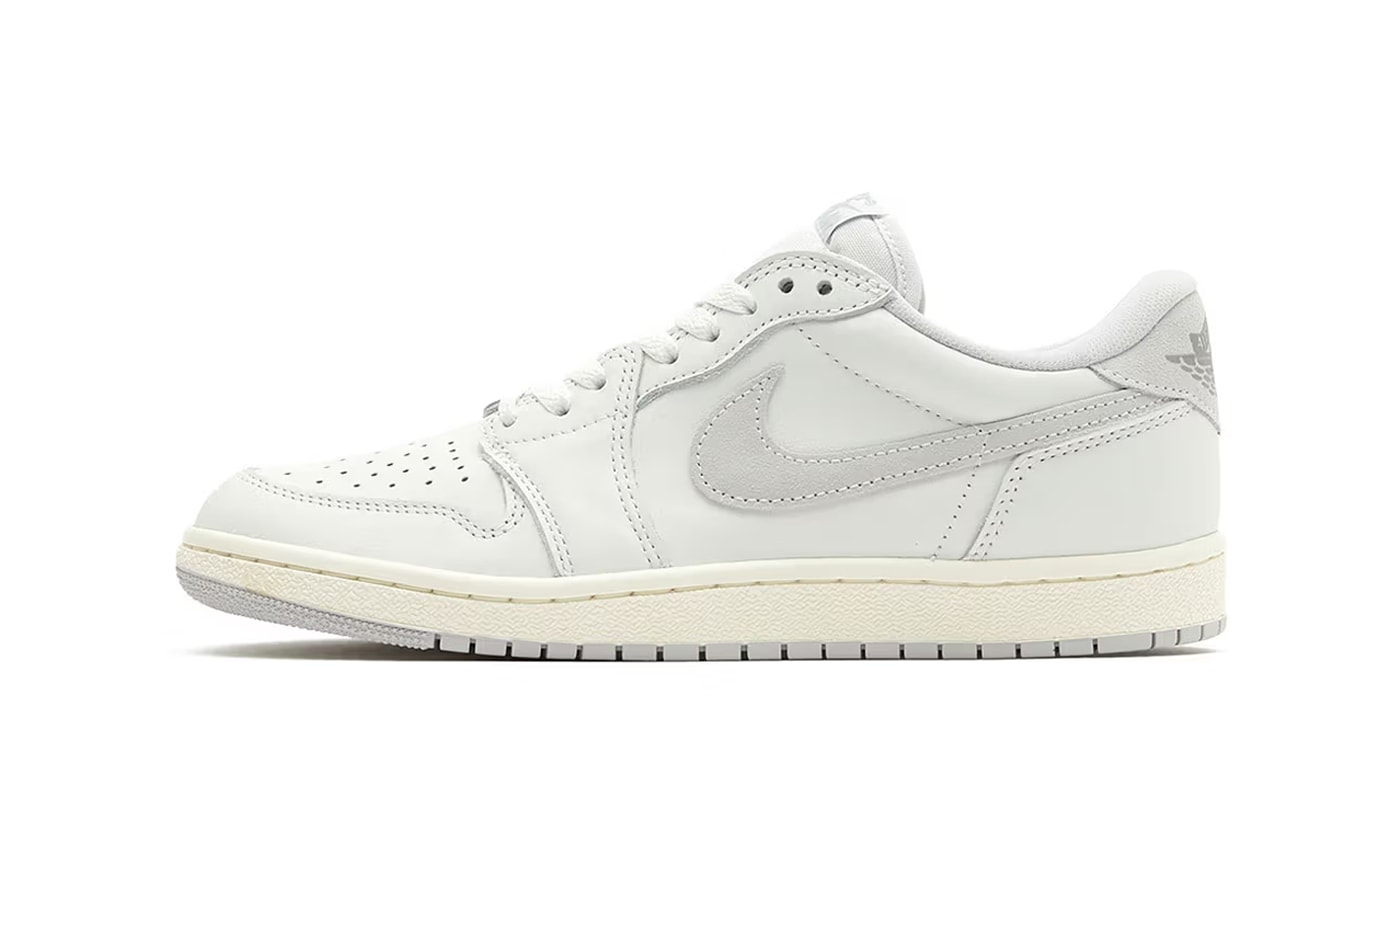 Air Jordan 1 Low 85 Neutral Grey FB9933 100 Release Date info store list buying guide photos price 